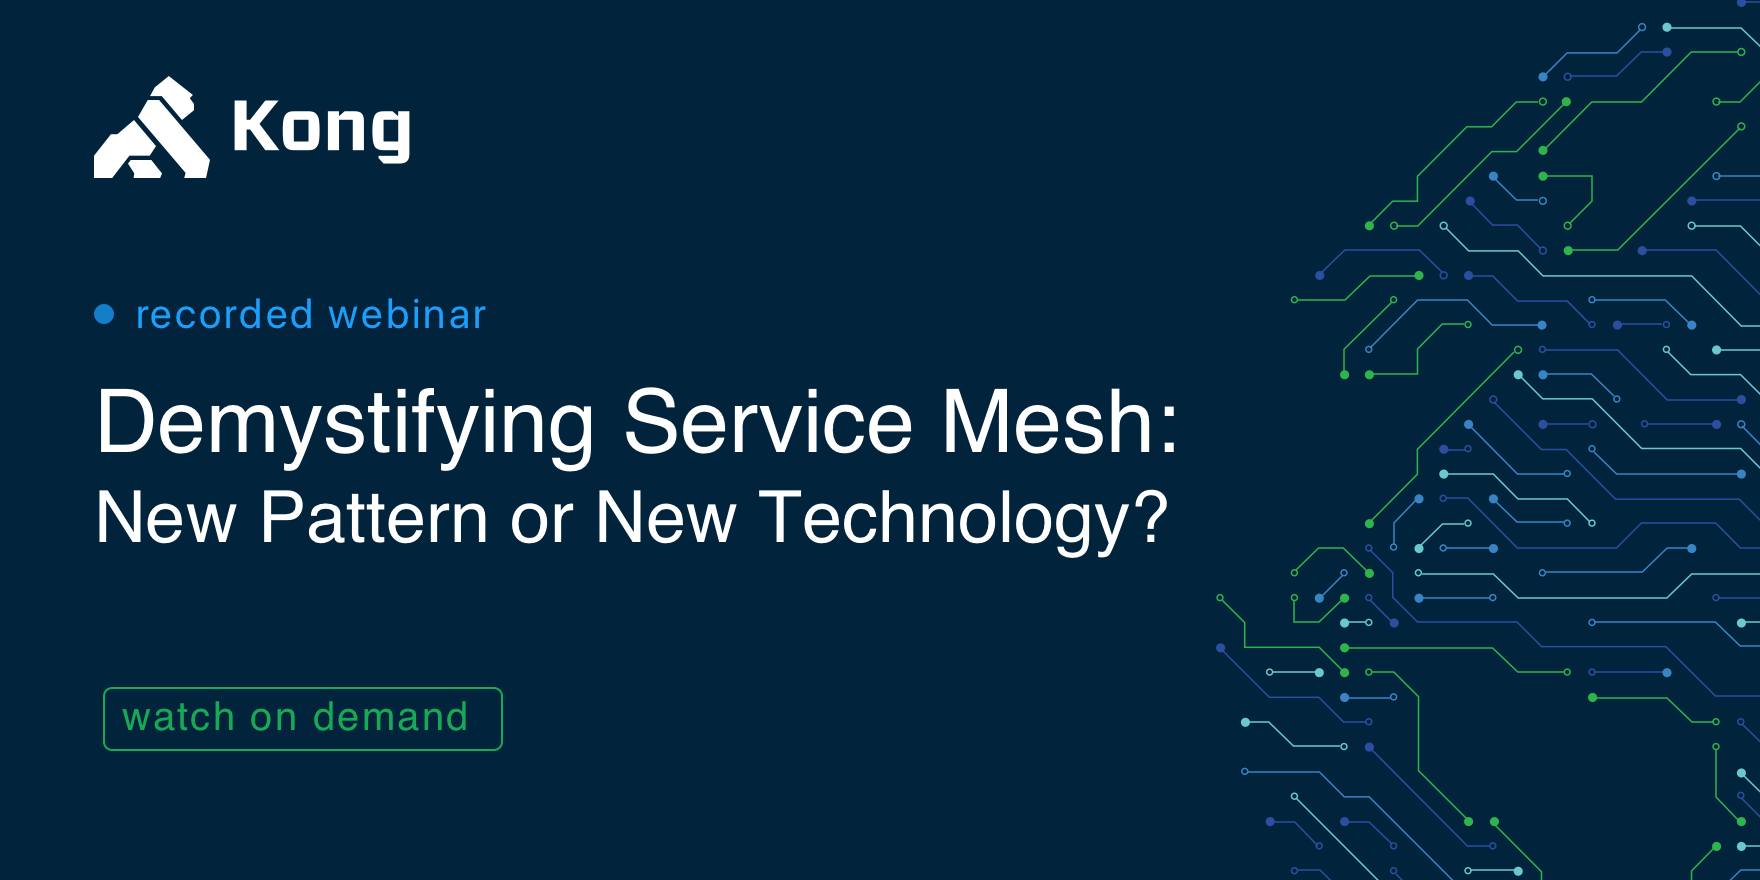 Demystifying Service Mesh: New Pattern or New Technology?